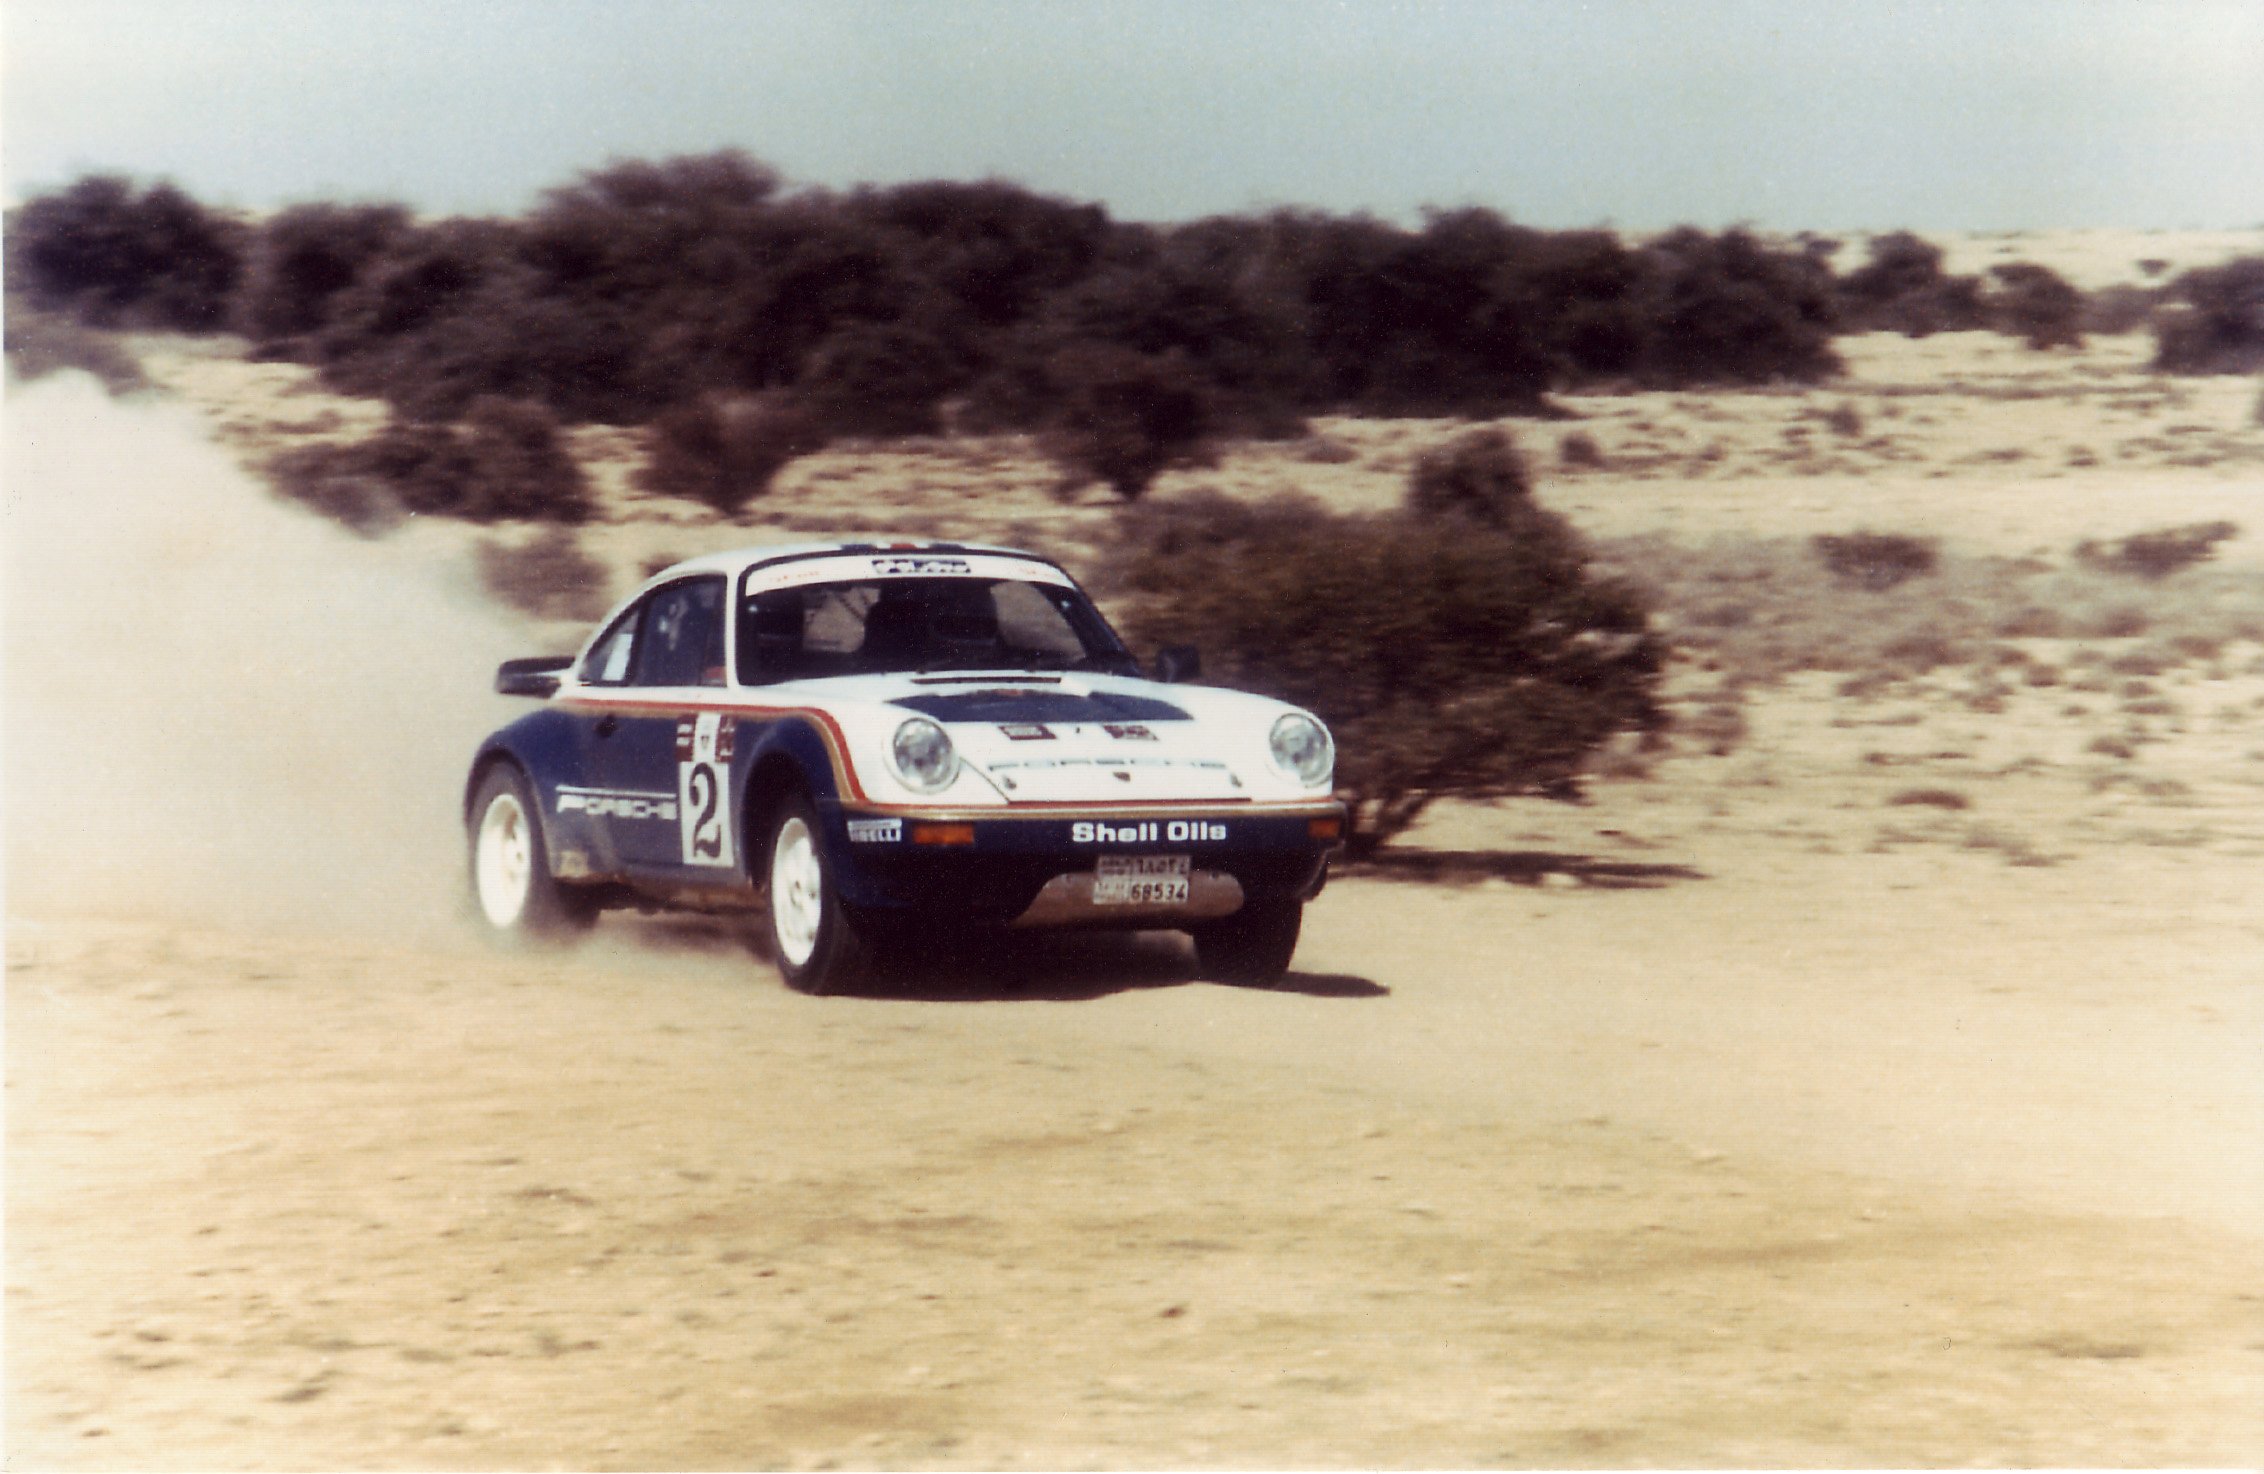 The Prodrive legacy stretches back to 1984 where they won their debut race at the Qatar Rally.